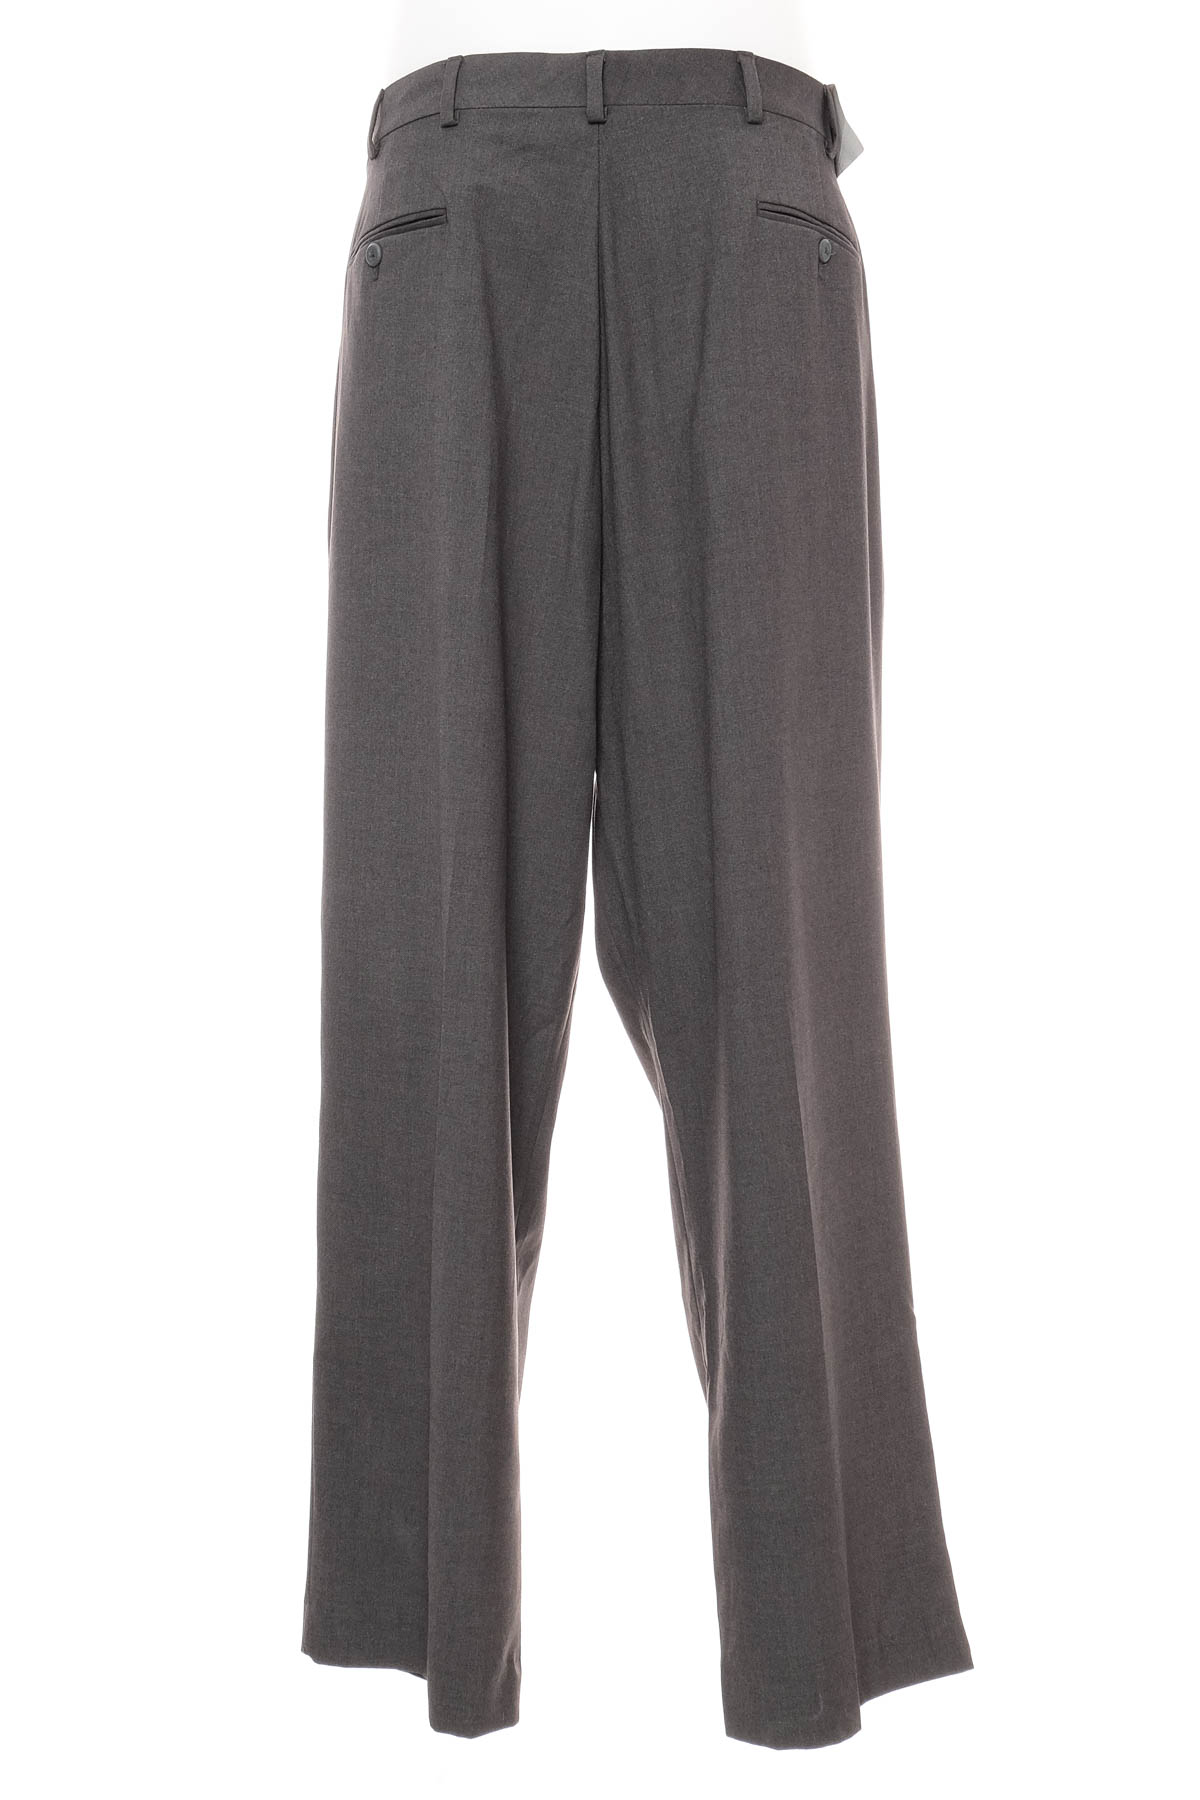 Men's trousers - STAFFORD - 1